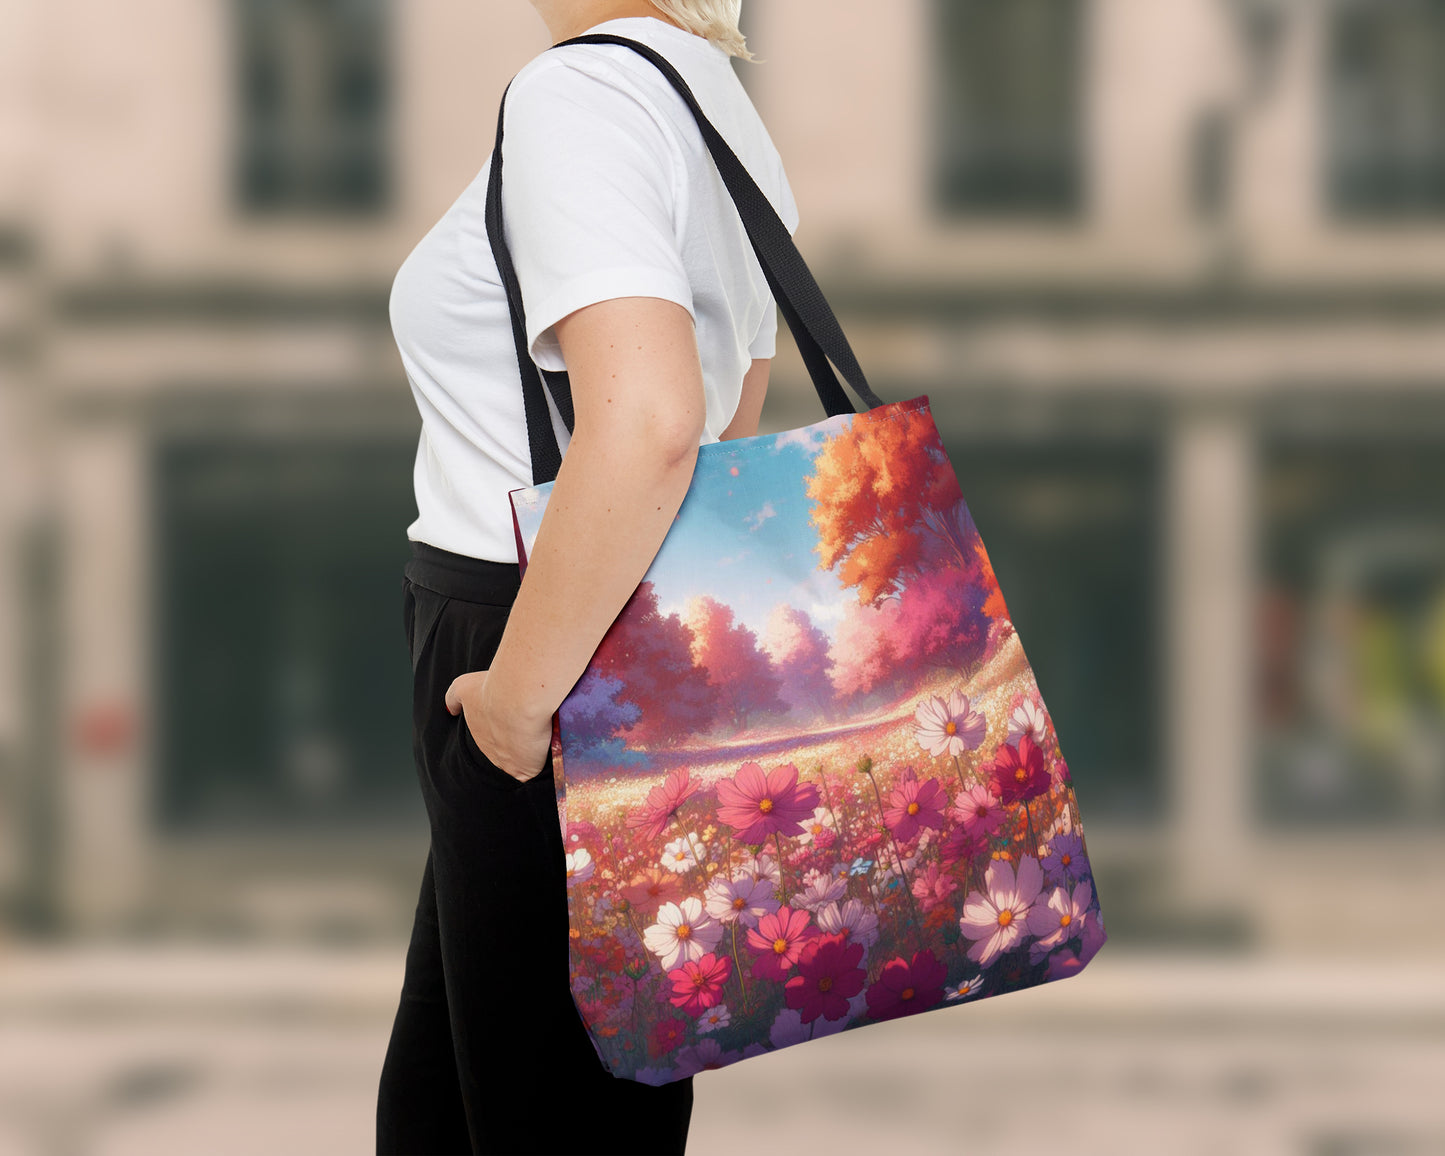 Flower fields in anime style tote bag